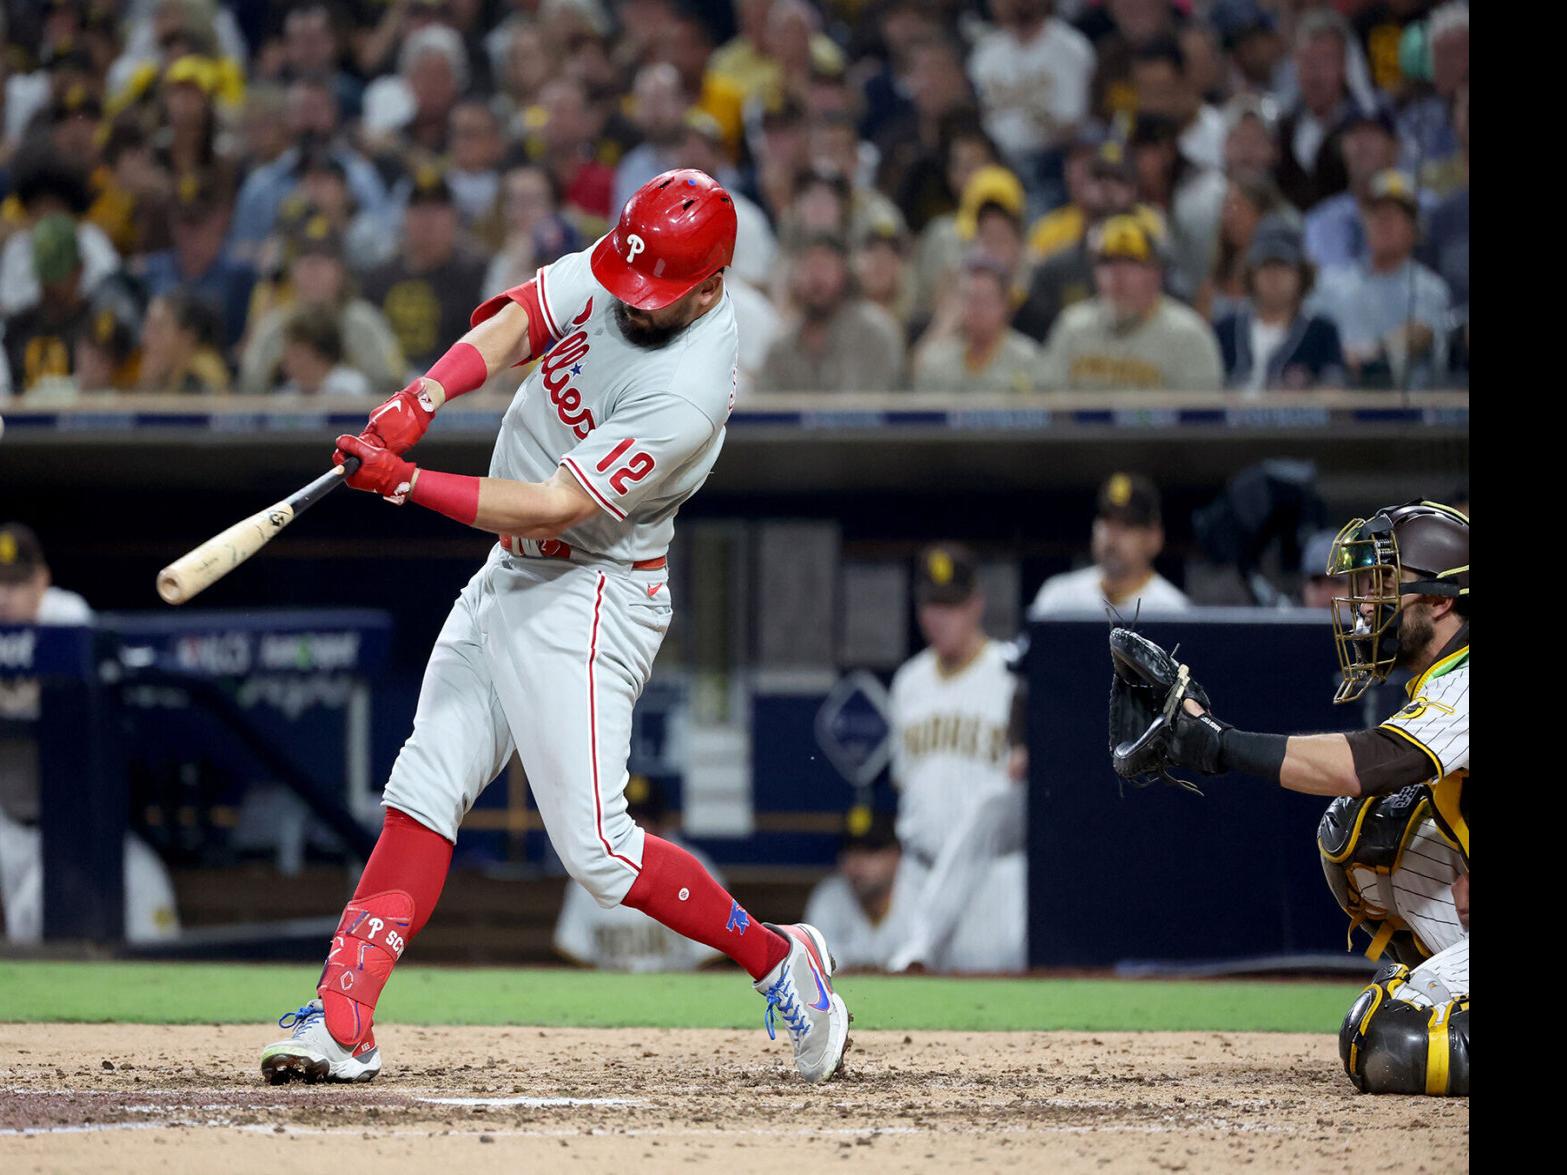 Kyle Schwarber hammers monster 488-foot home run to help Philadelphia  Phillies take Game 1 against the San Diego Padres, Pro Sports